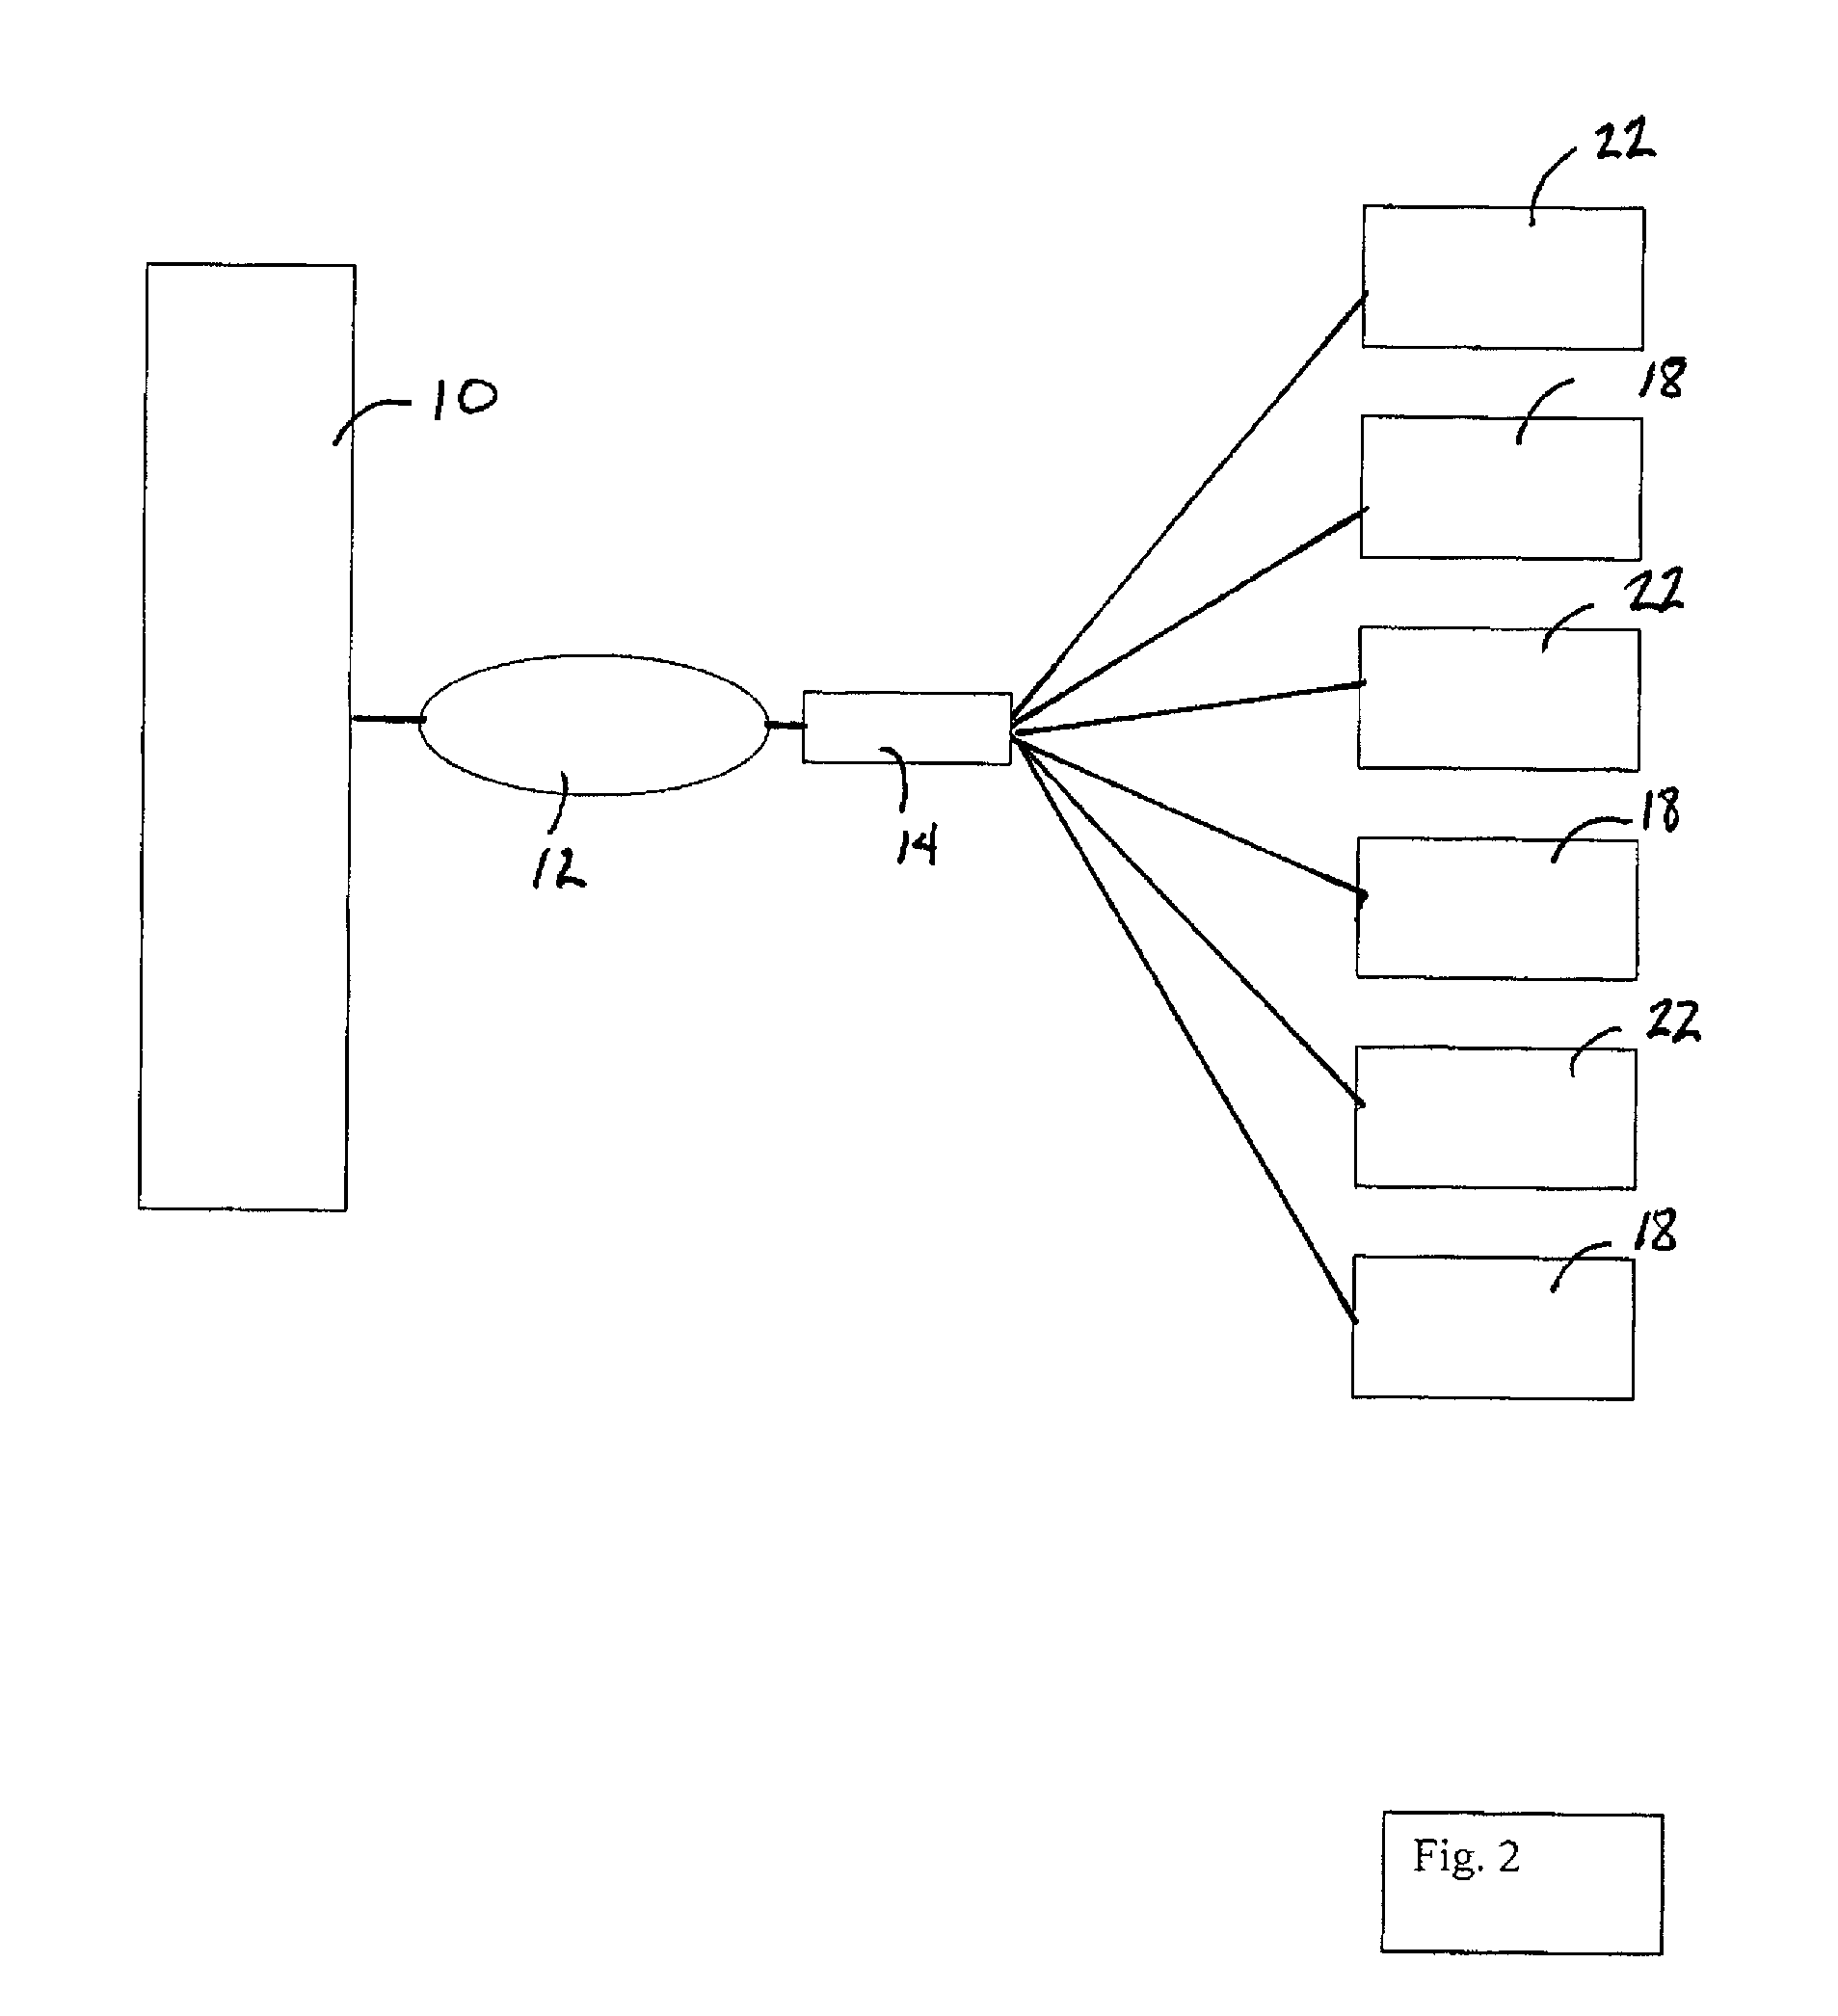 Mechanism for Multiple System Common Scheduling and Analysis of Unrelated Events in a Corrections Facility